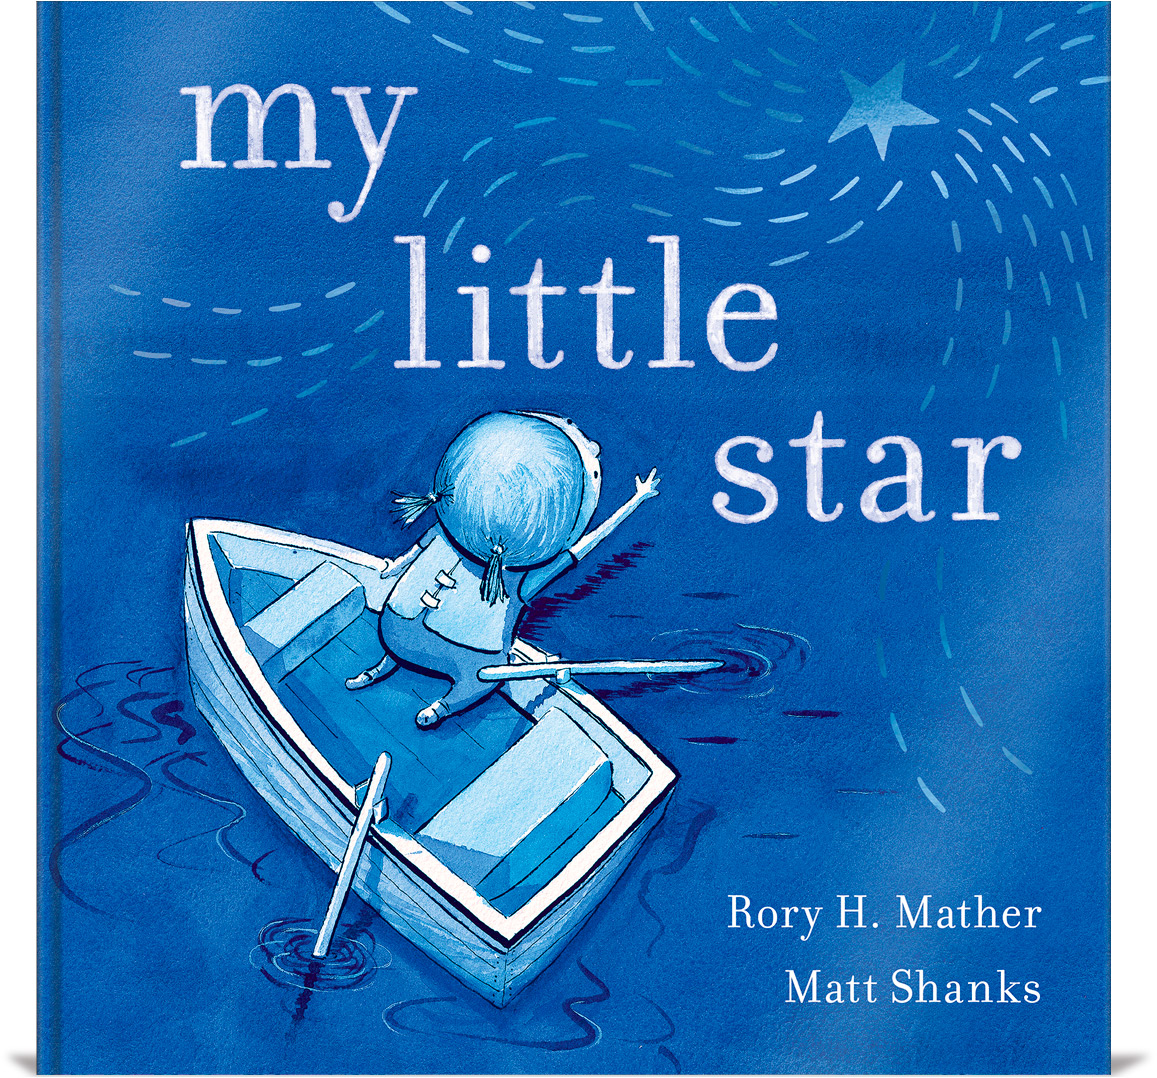 Picture book cover: A little girl wearing a life jacket leans out of her boat trying to touch a rippling star that's reflected in the water